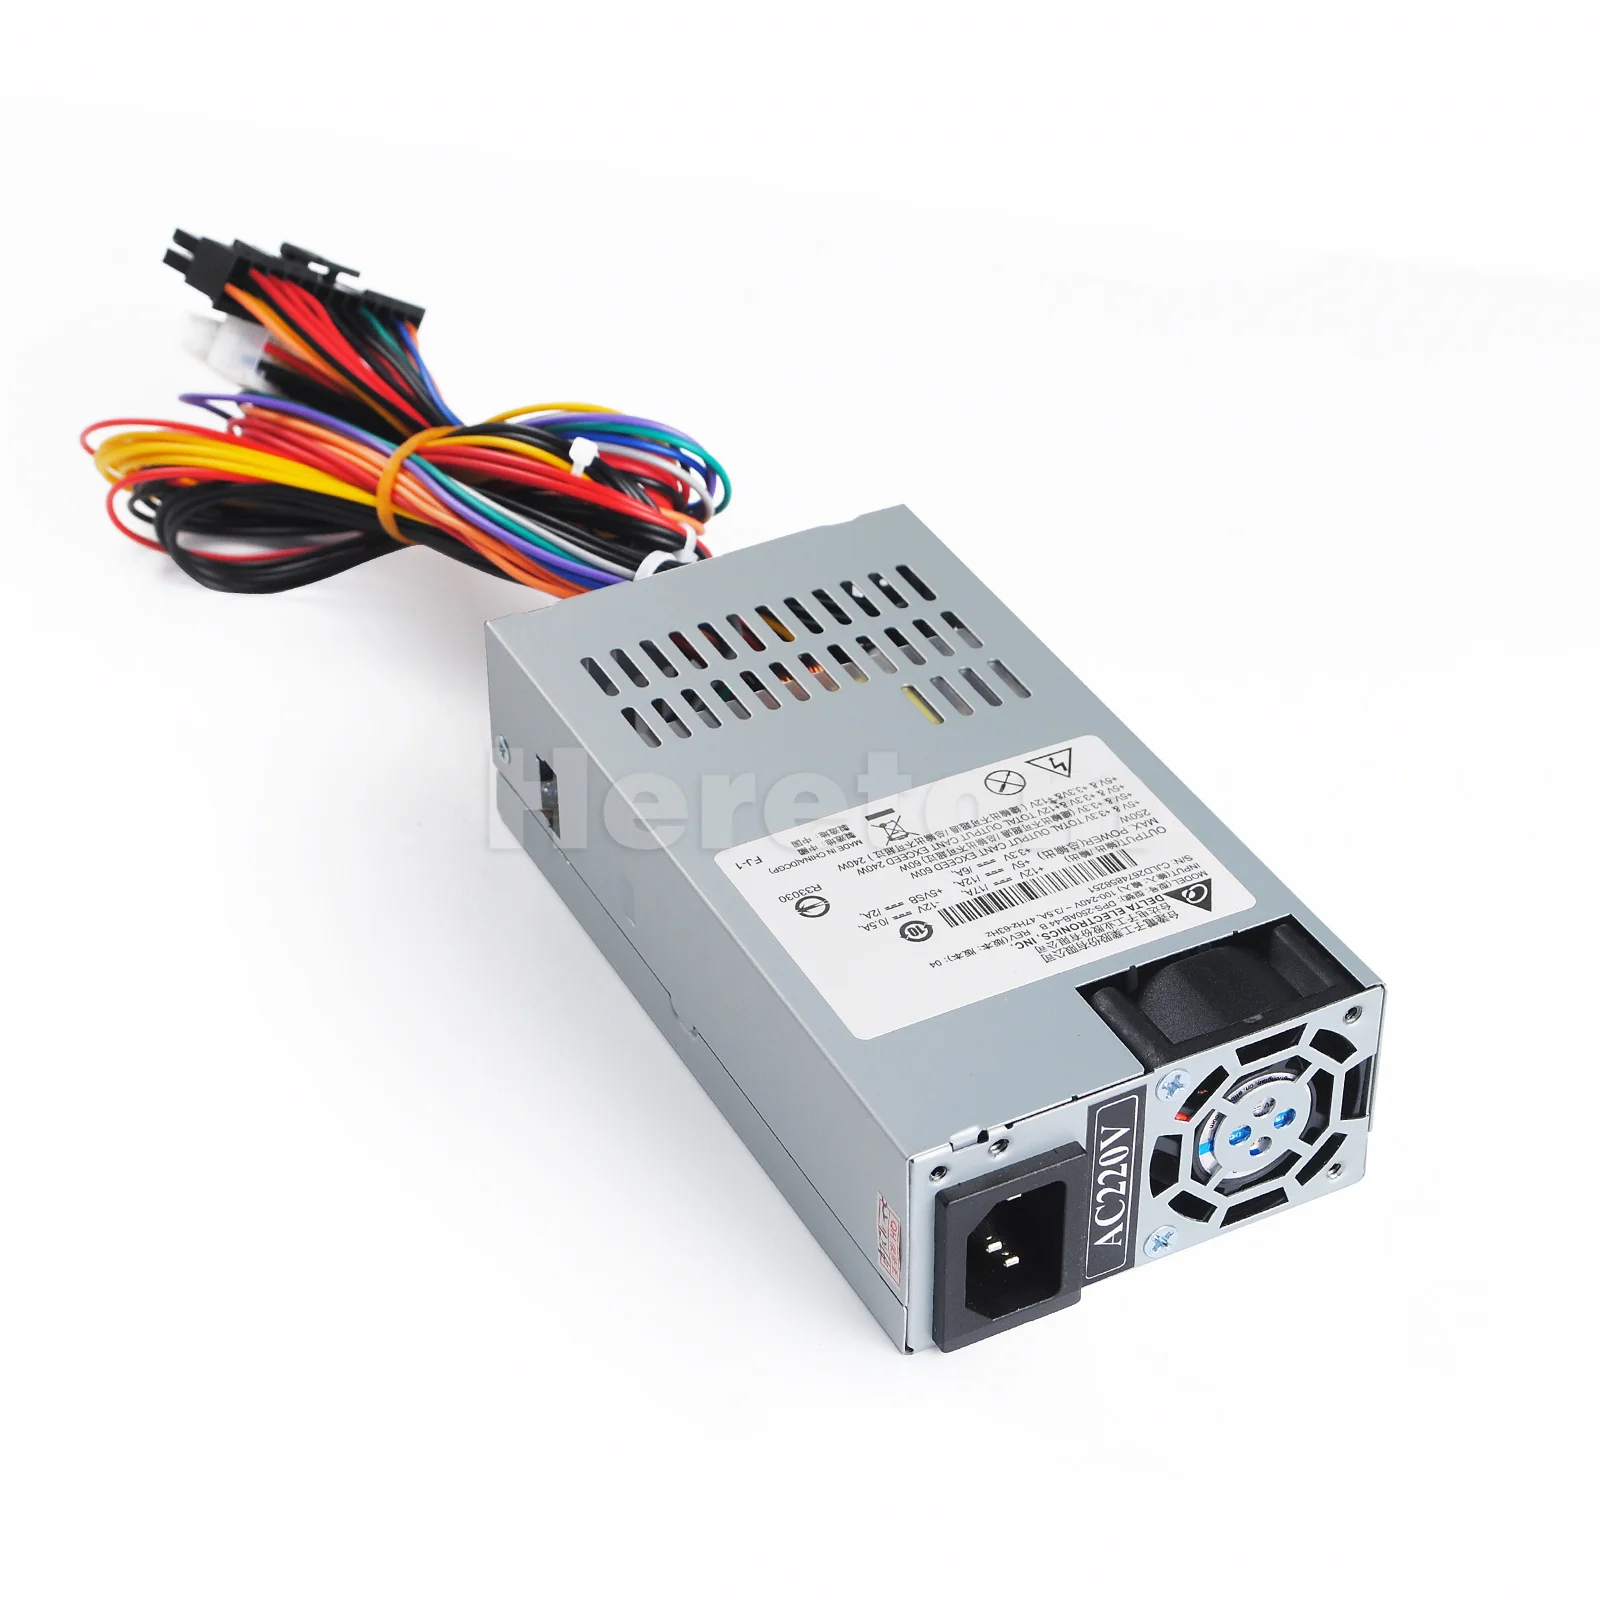 New Delta 1Uflex Server NAS Host Power Supply For Synology DS1815+ DS1812+ DS1512+ DS1511+ DS1010+ | Компьютеры и офис